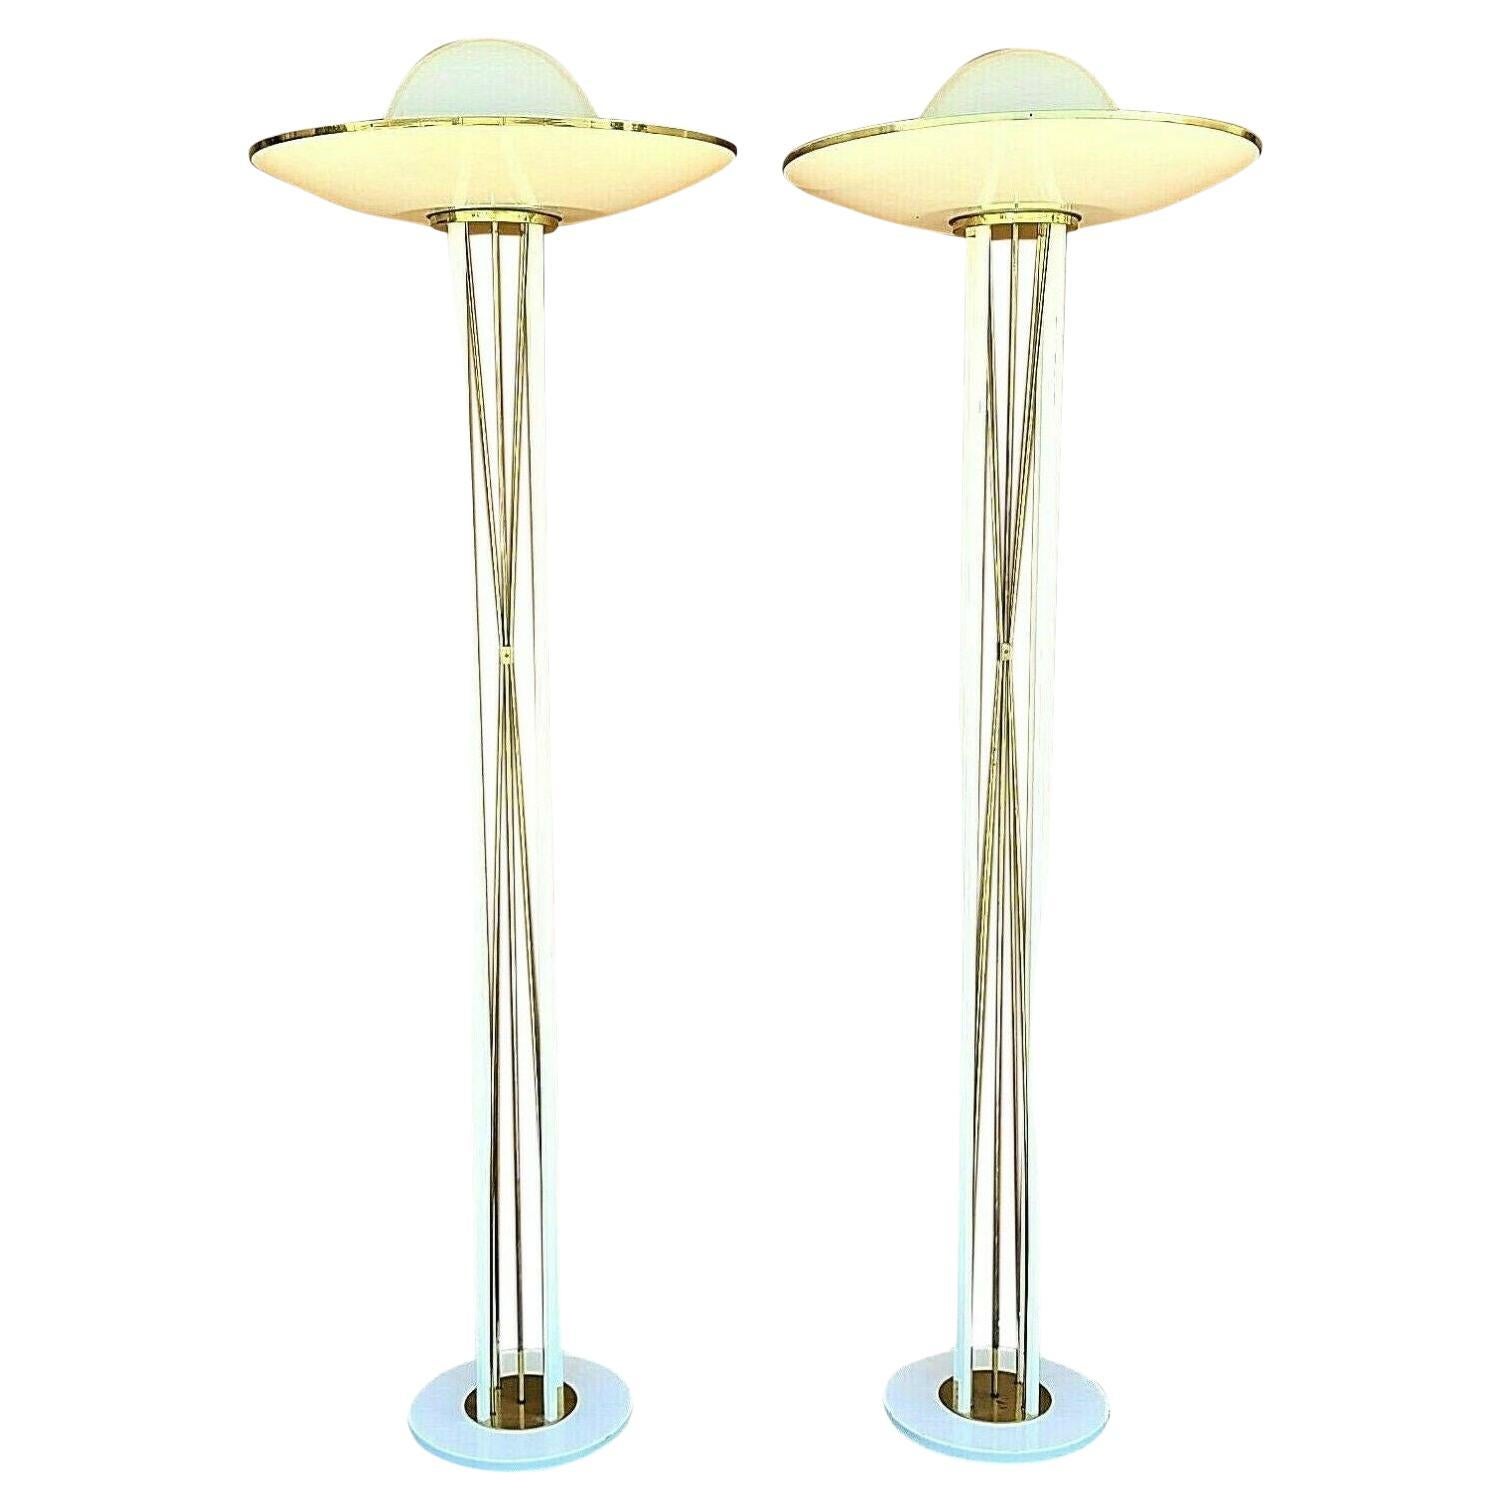 Massive 1970's Reggiani Italian Style Torchiere Floor Lamps, A Pair For Sale